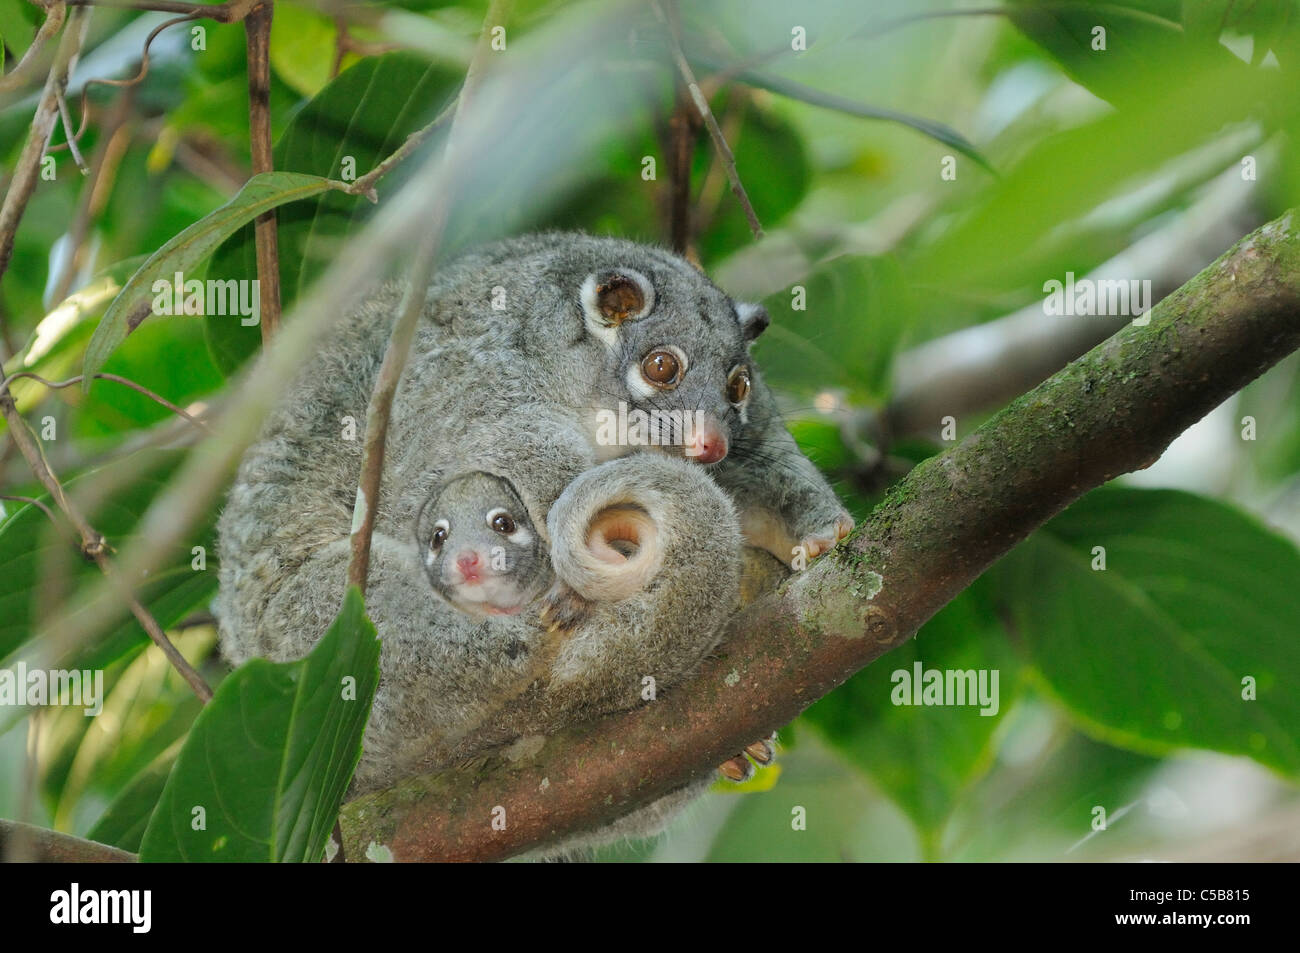 Green Ringtail Possum Pseudocheirus archeri Female with baby in pouch Photographed in Queensland, Australia Stock Photo